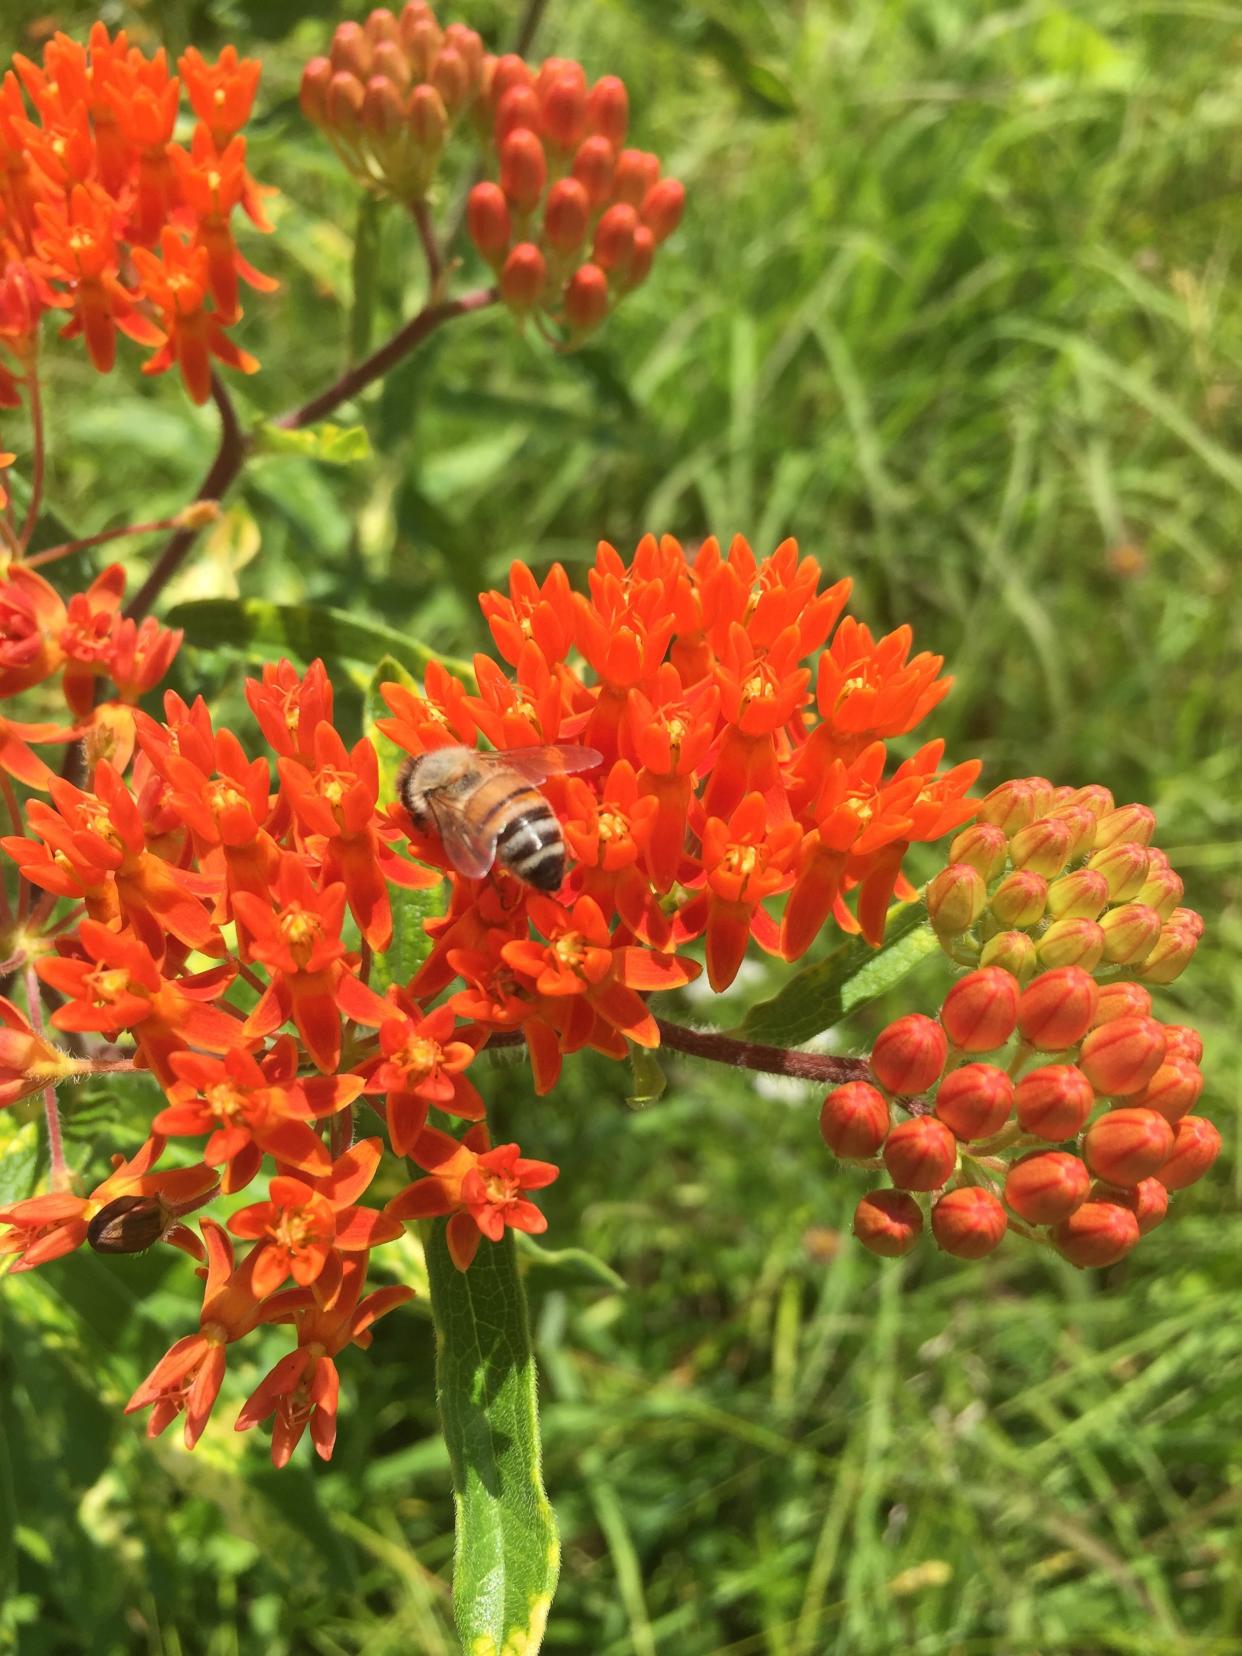 Asclepias tuberosa - butterfly milkweed: The cheerful orange blooms of this Kentucky native plant are common in open fields and along roadsides all over the commonwealth. Butterfly milkweed is the most popular milkweed for sunny gardens.